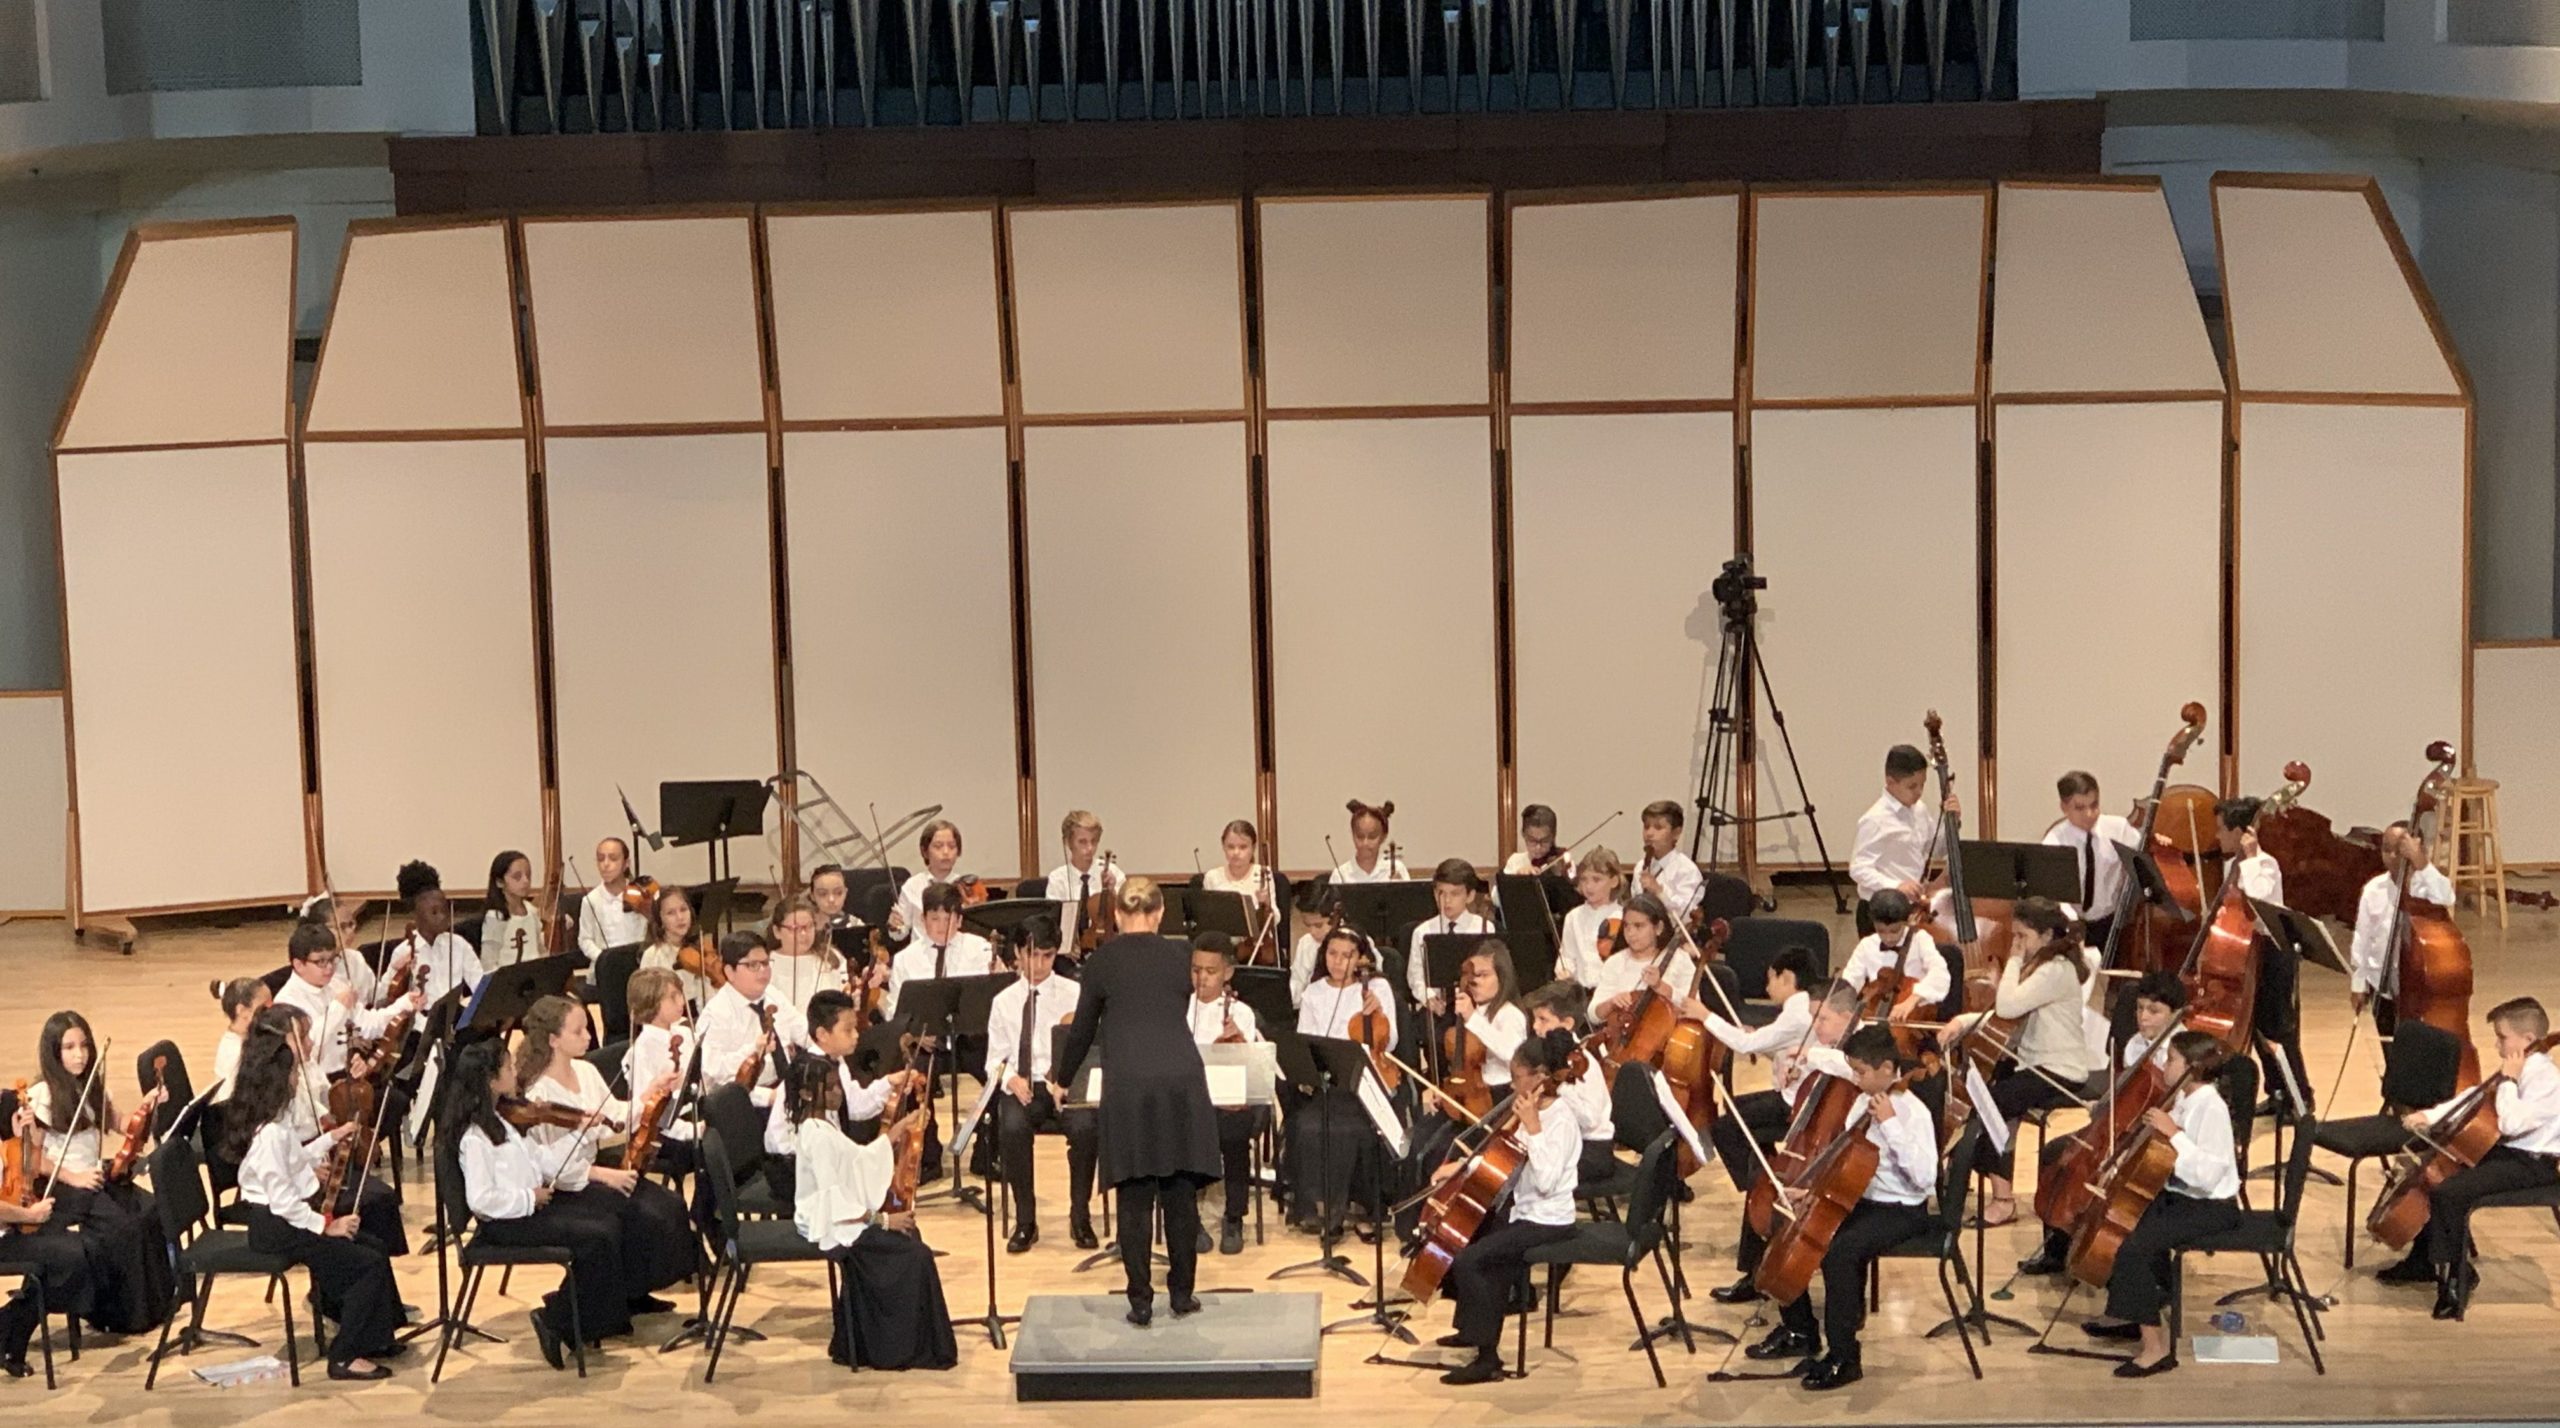 Academy Orchestra in 2019